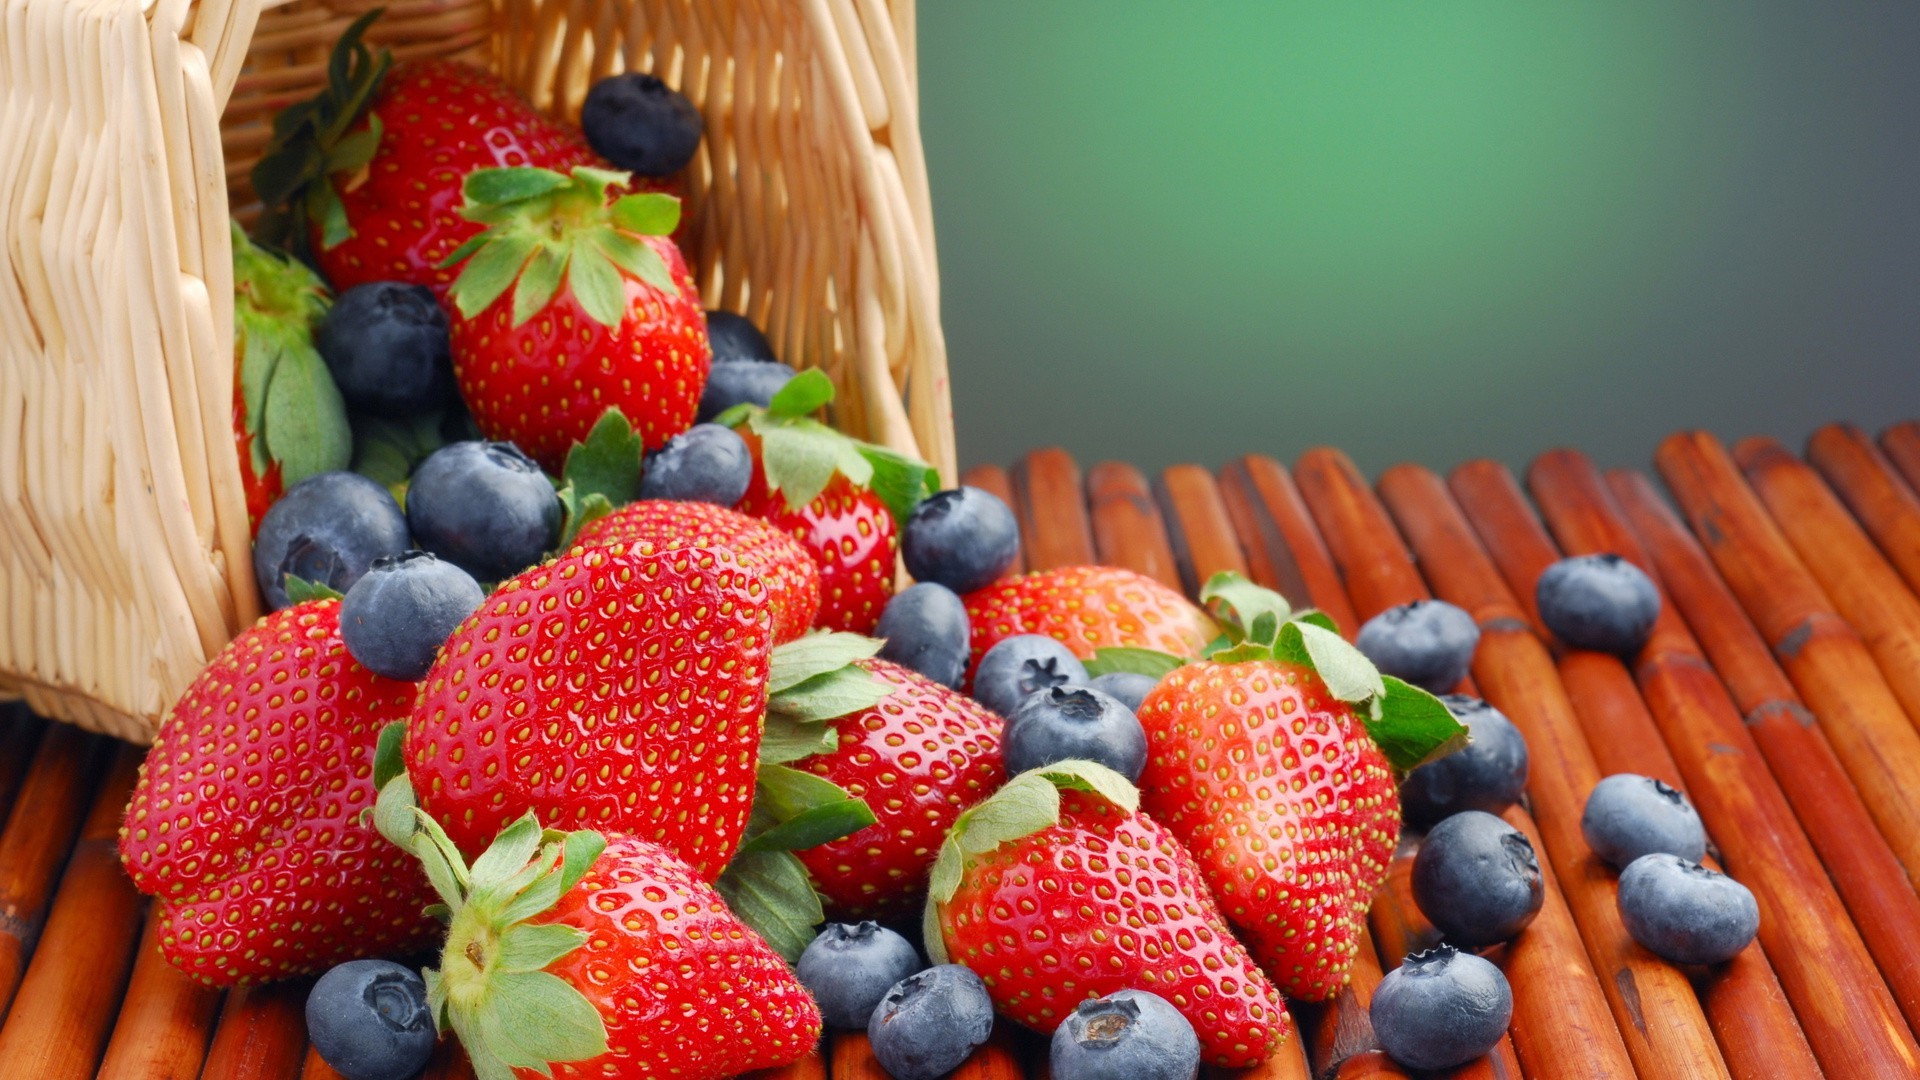 berries fruit strawberry berry health food blueberry juicy nutrition basket delicious healthy sweet summer pasture grow raspberry